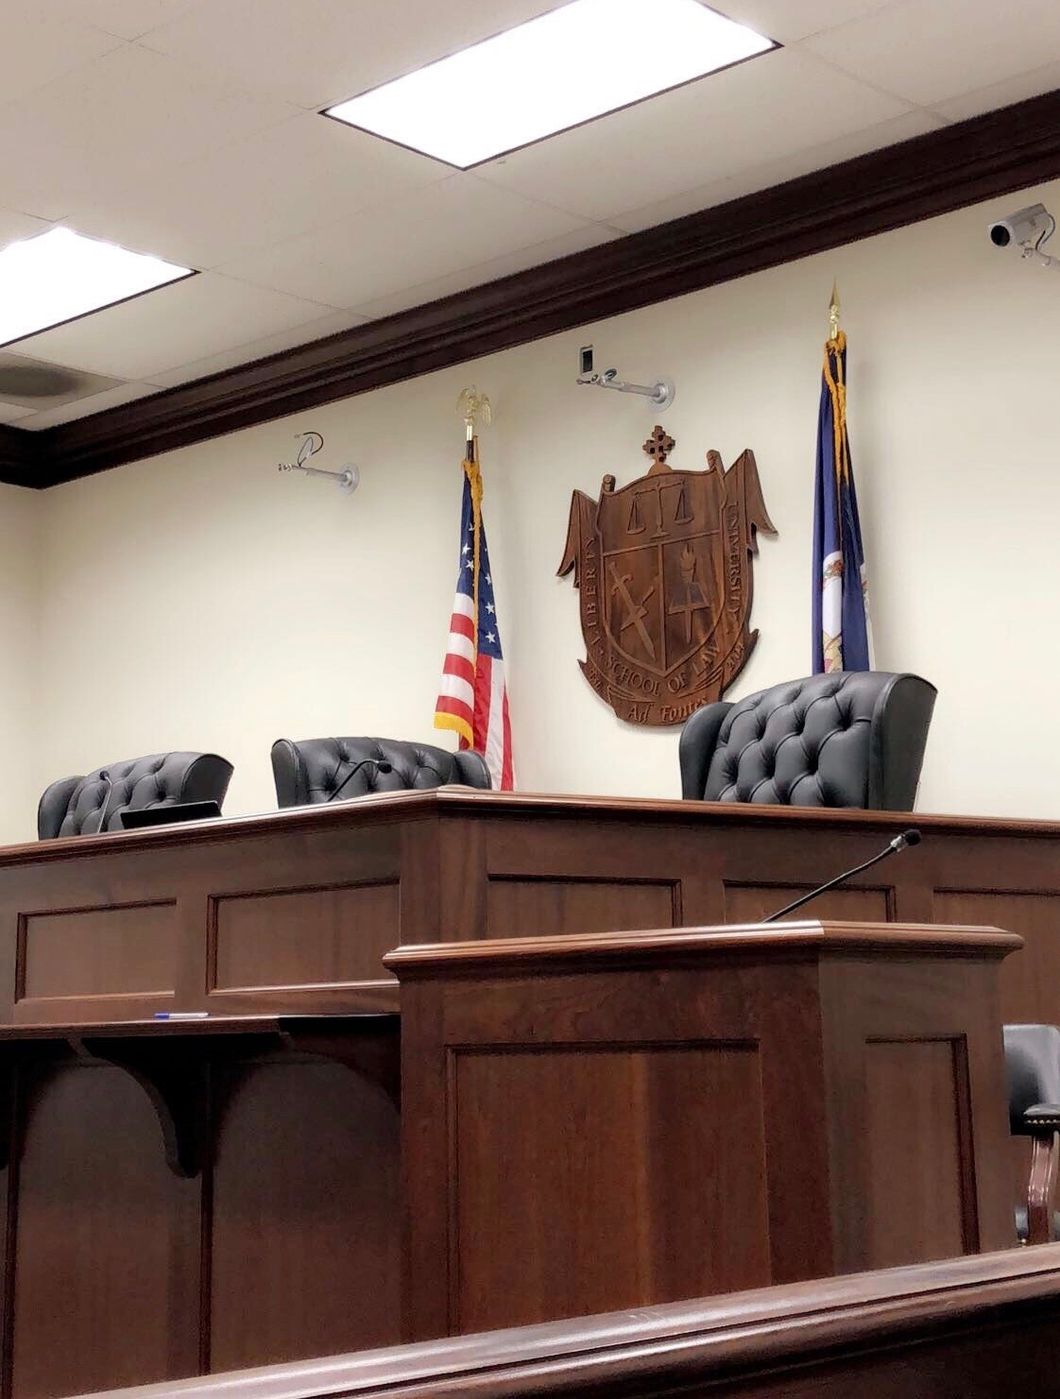 5 Valuable Lessons I Learned While Competing In Moot Court